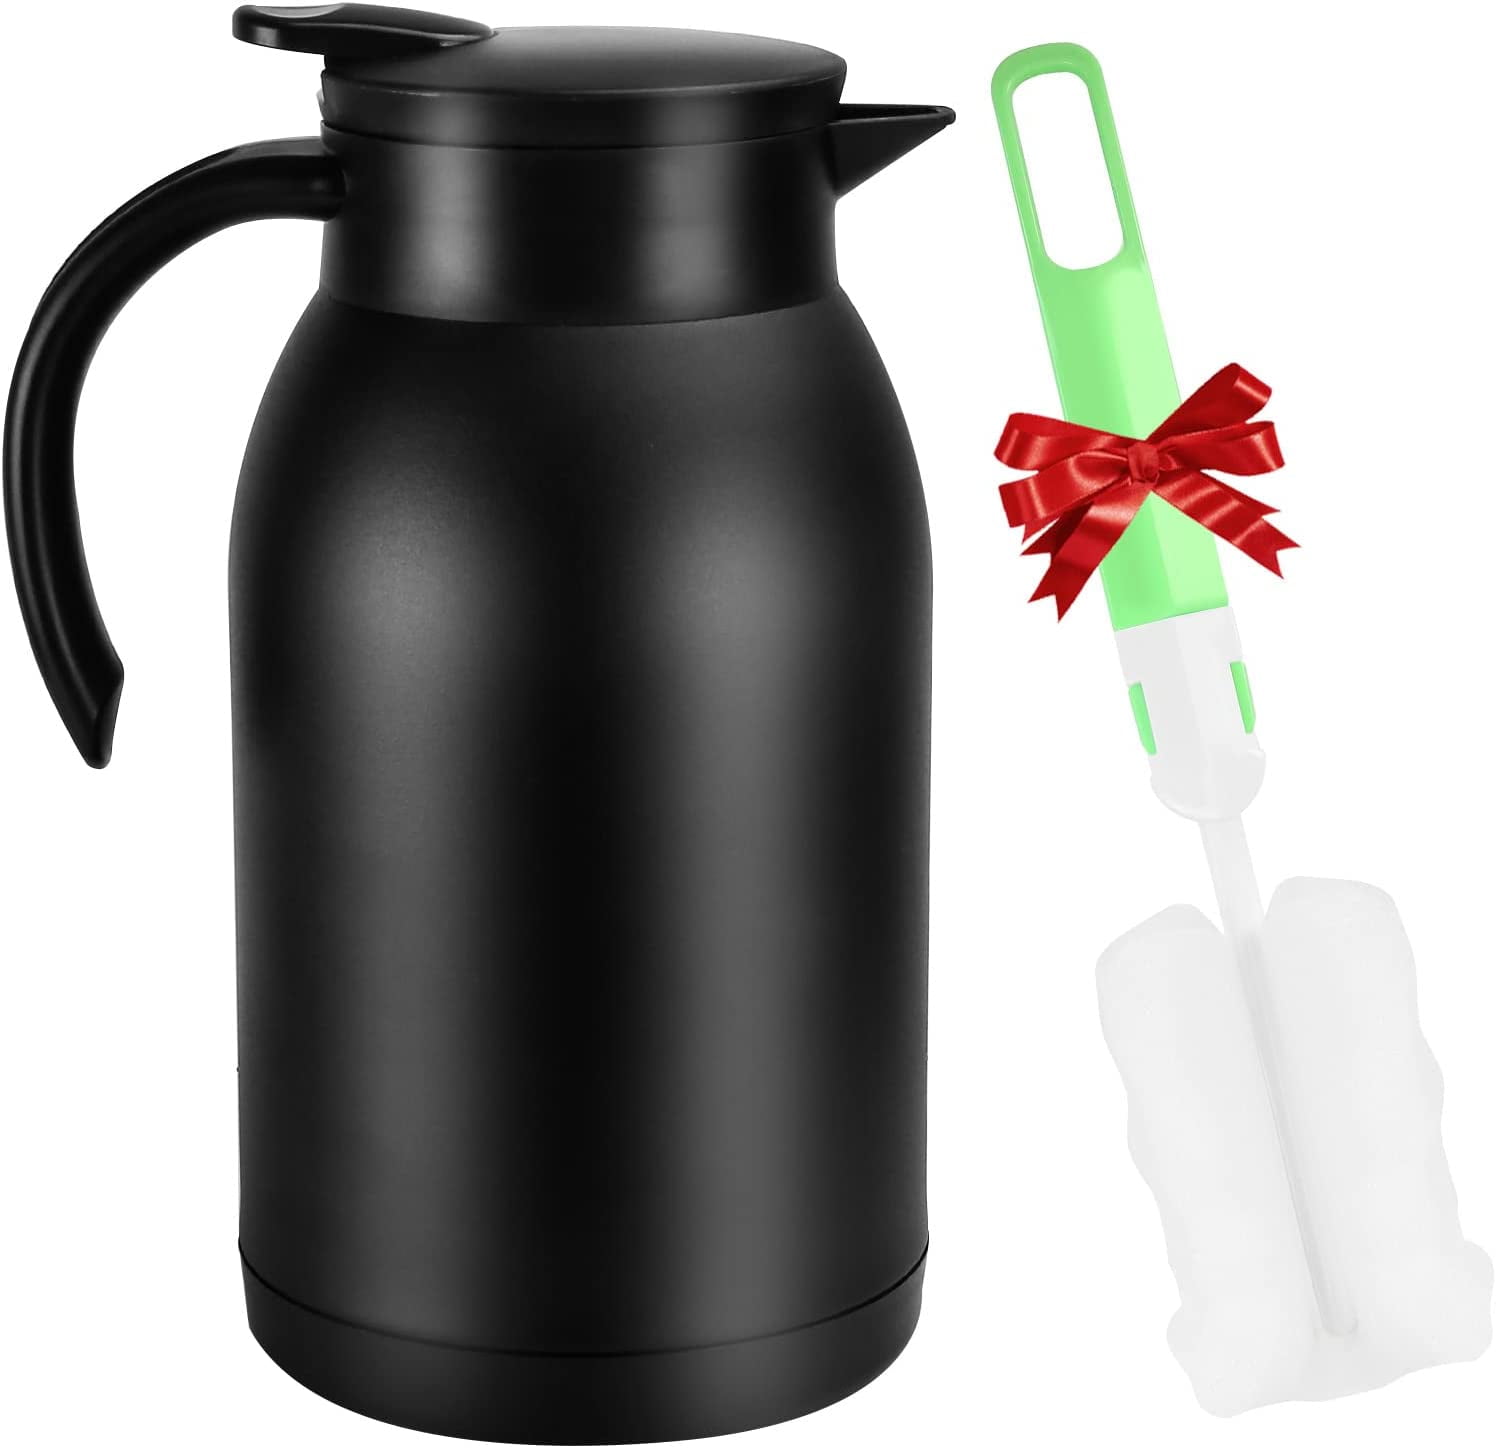 Lafeeca Thermal Coffee Carafe - Beverages Dispenser - Tea Pot Water Pitcher - Double Wall Insulated Thermos - 1500 ml Black